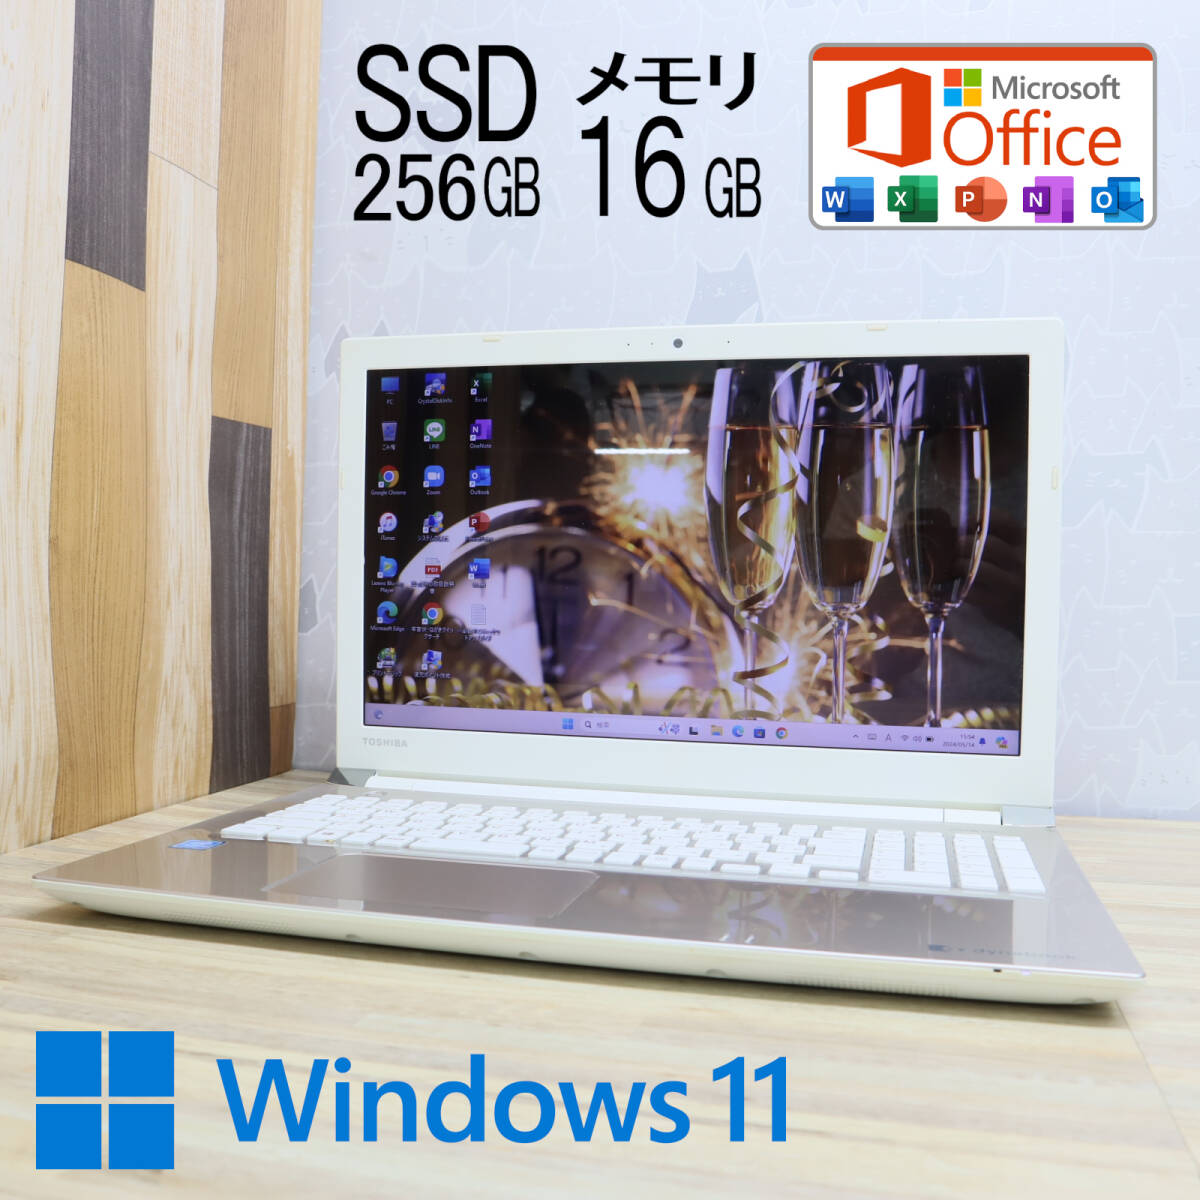 * beautiful goods new goods SSD256GB memory 16GB*T45/AG Web camera Celeron 3855U Win11 Microsoft Office 2019 Home&Business secondhand goods Note PC*P71427